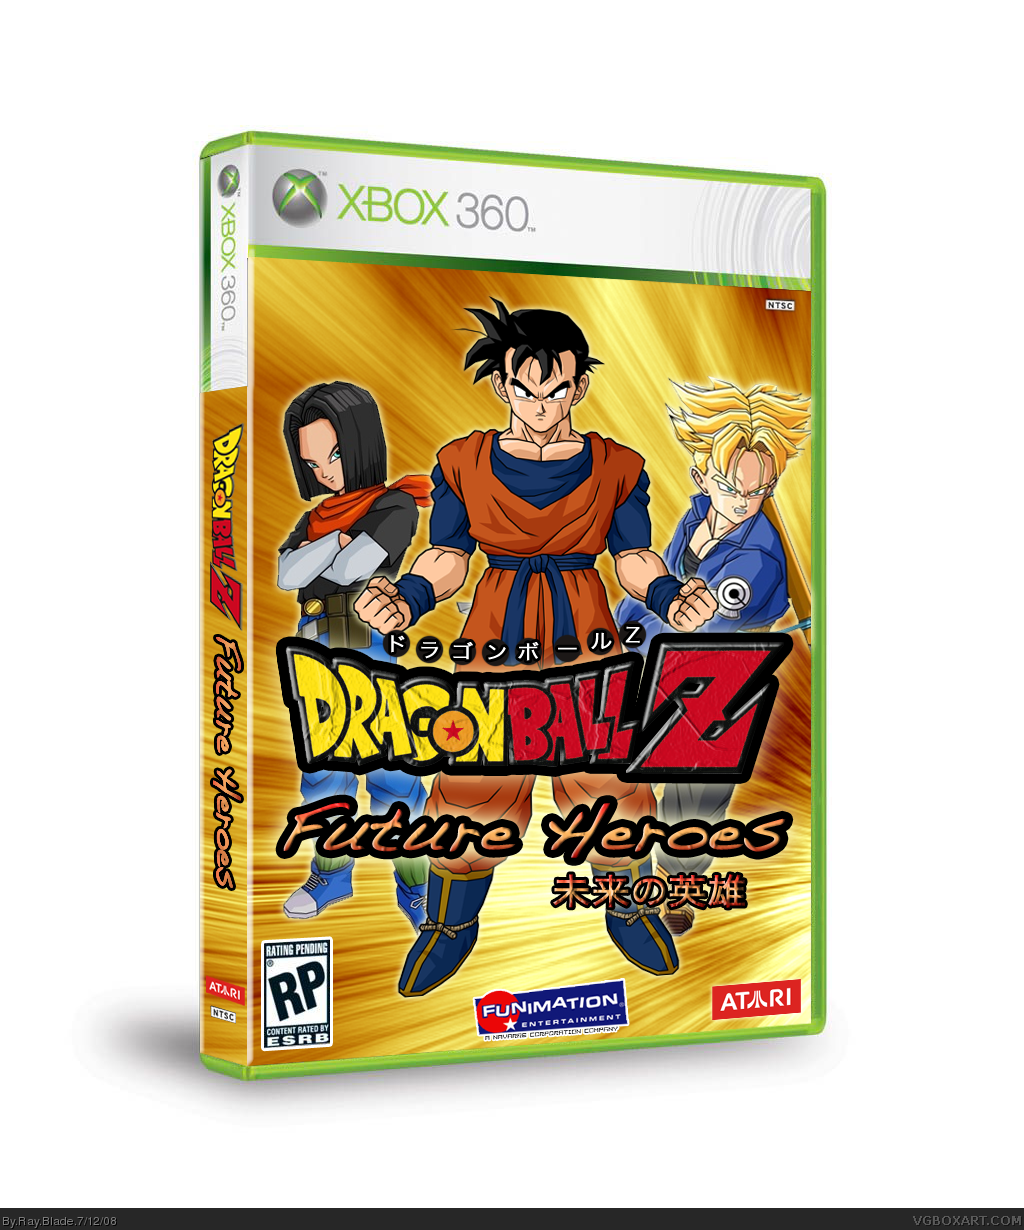 DragonBall Z: Future Heroes Xbox 360 Box Art Cover by Ray Blade